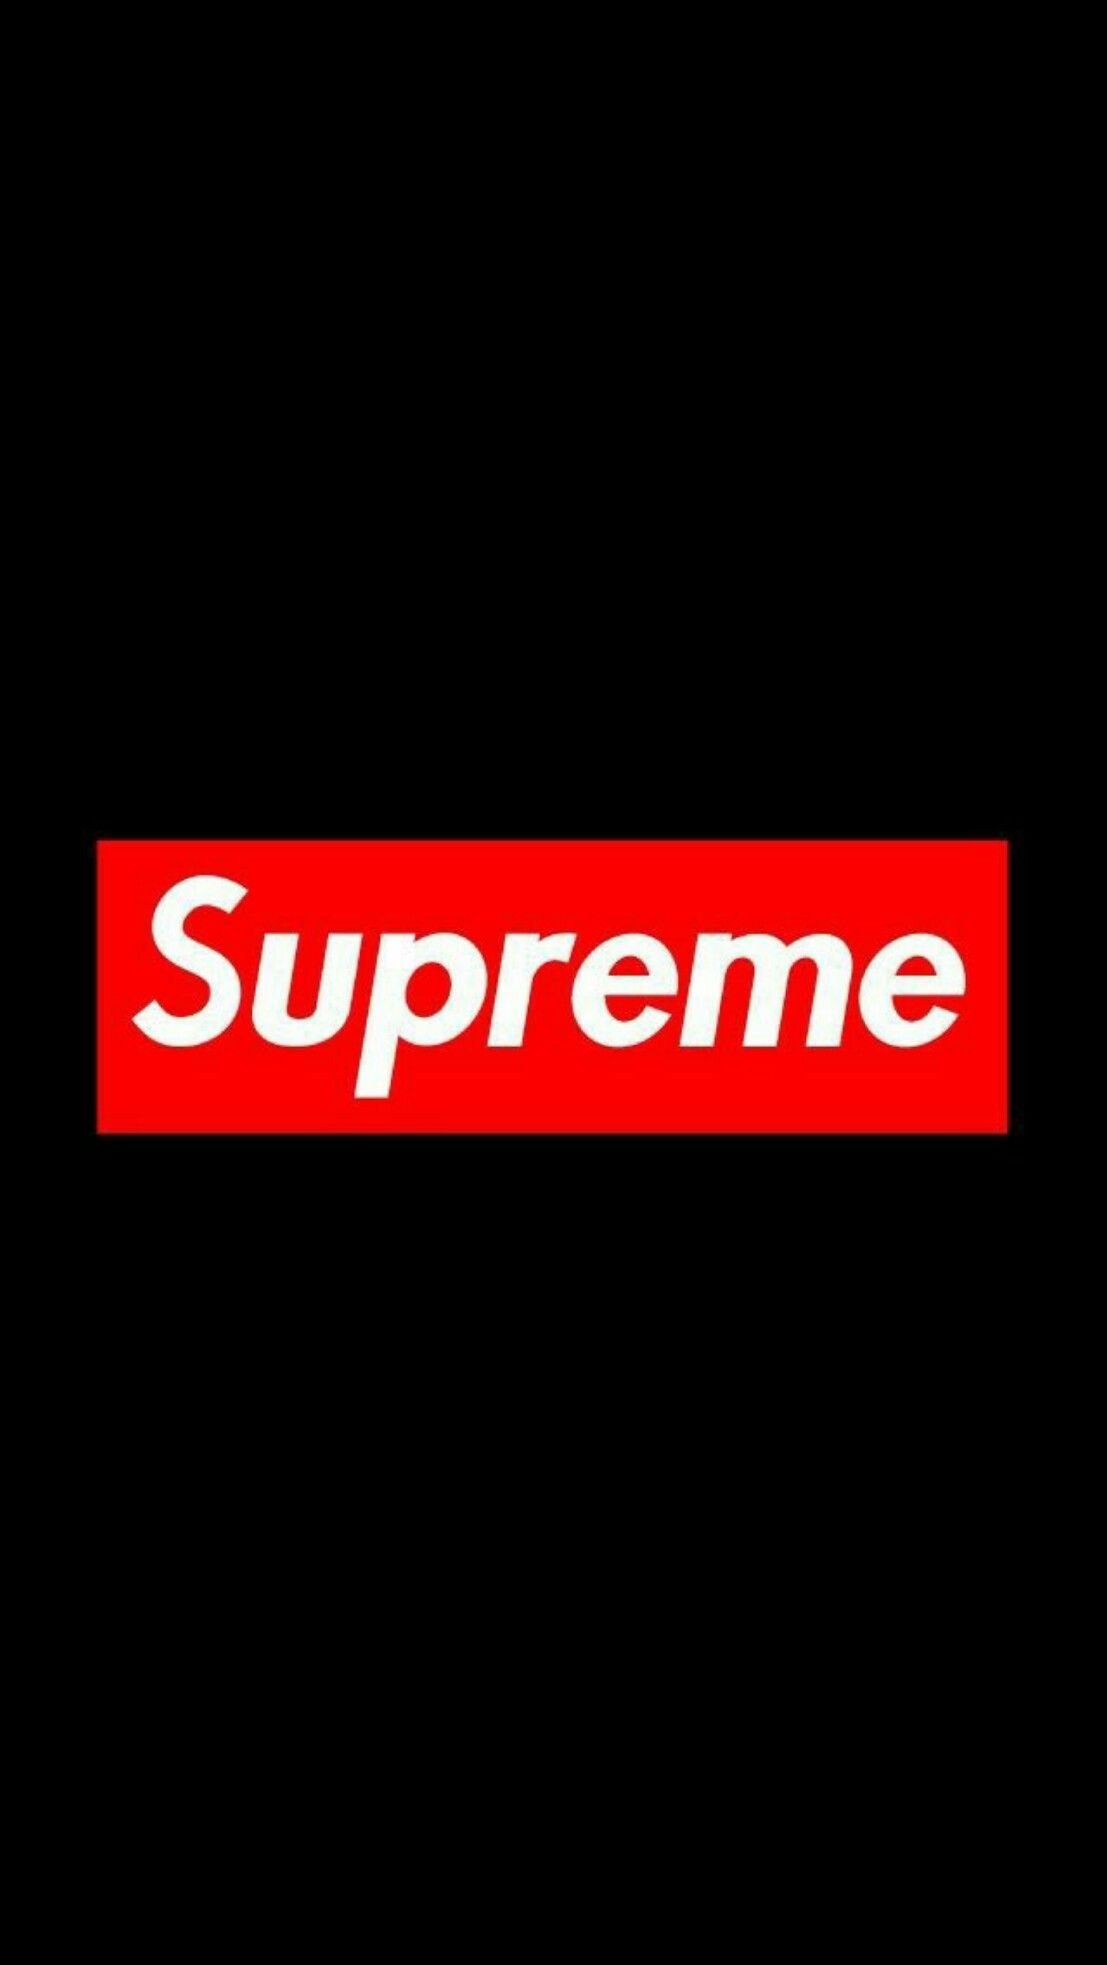 Supreme Black Wallpaper iPhone Android